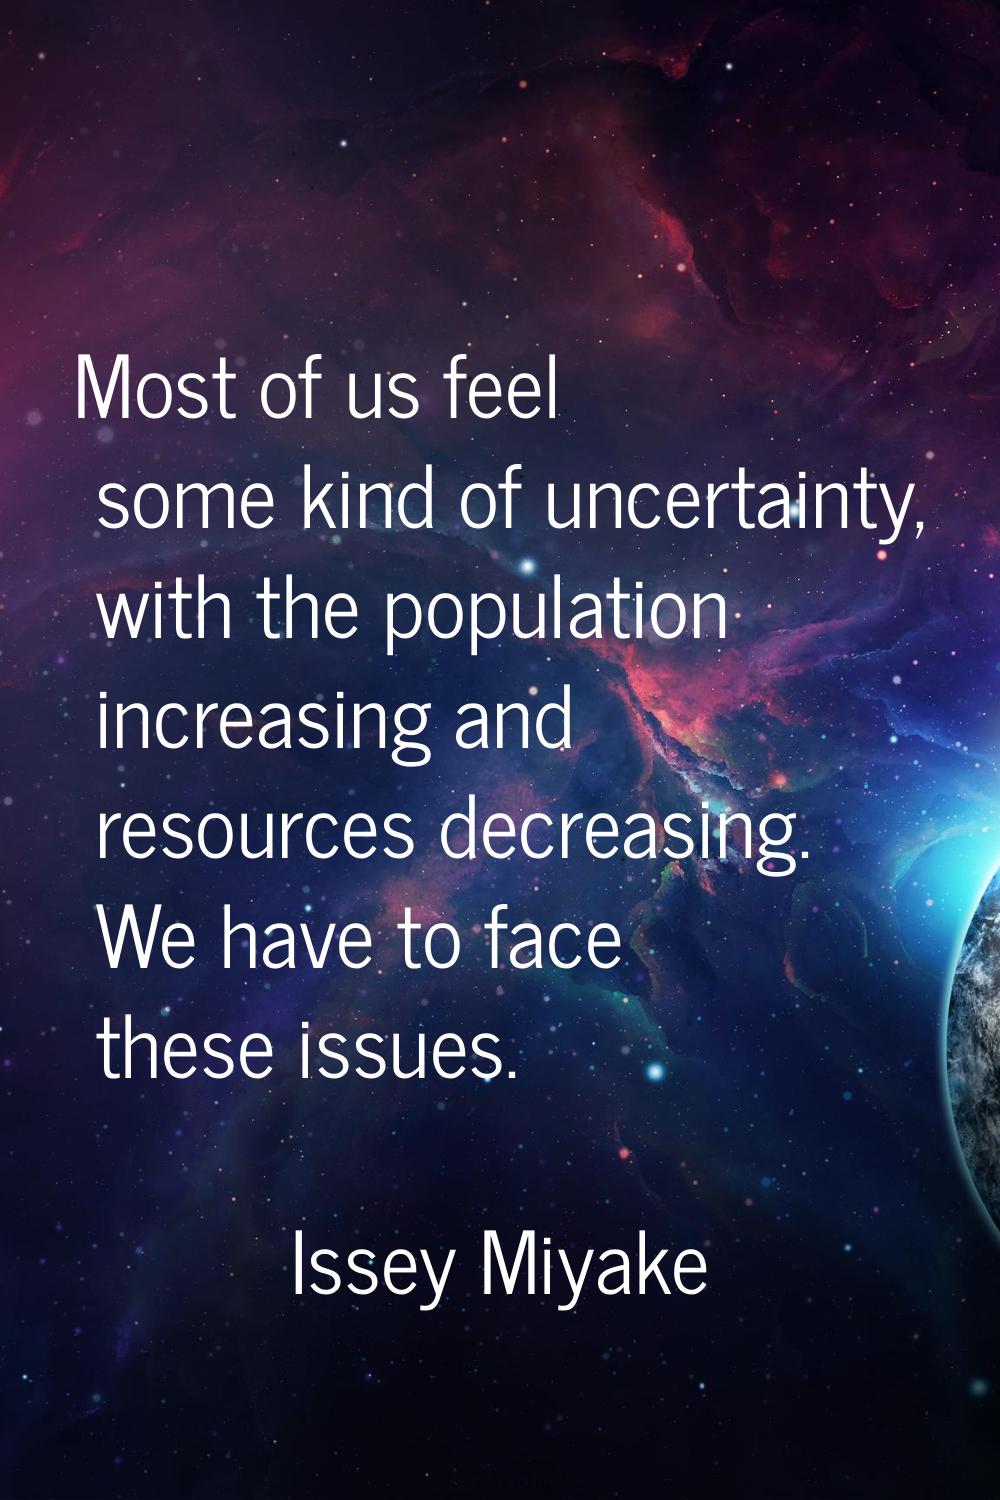 Most of us feel some kind of uncertainty, with the population increasing and resources decreasing. 